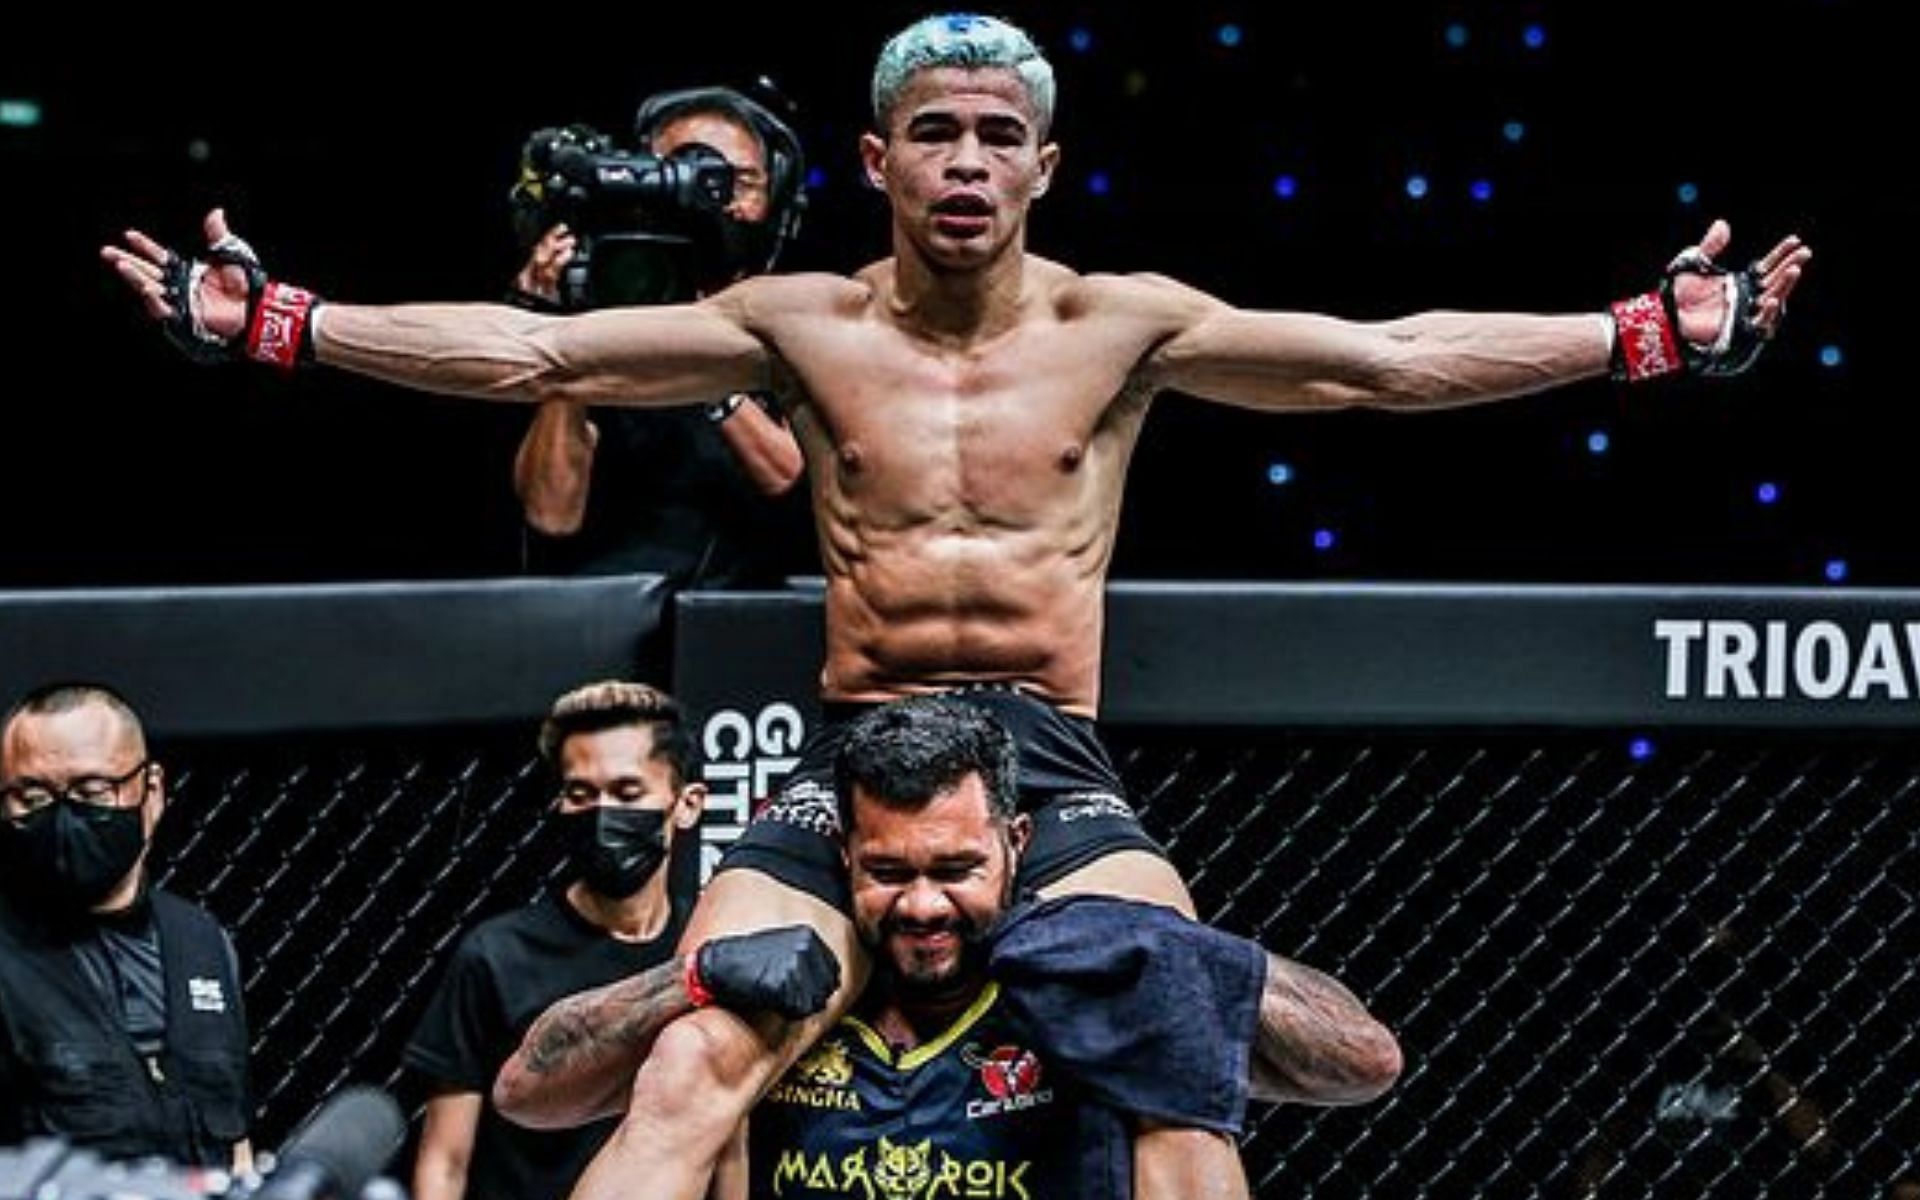 Fabricio &quot;Wonder boy&quot; Andrade at ONE: Winter Warriors after a K.O. win against Li Kai Wen [Credit: ONE Championship]